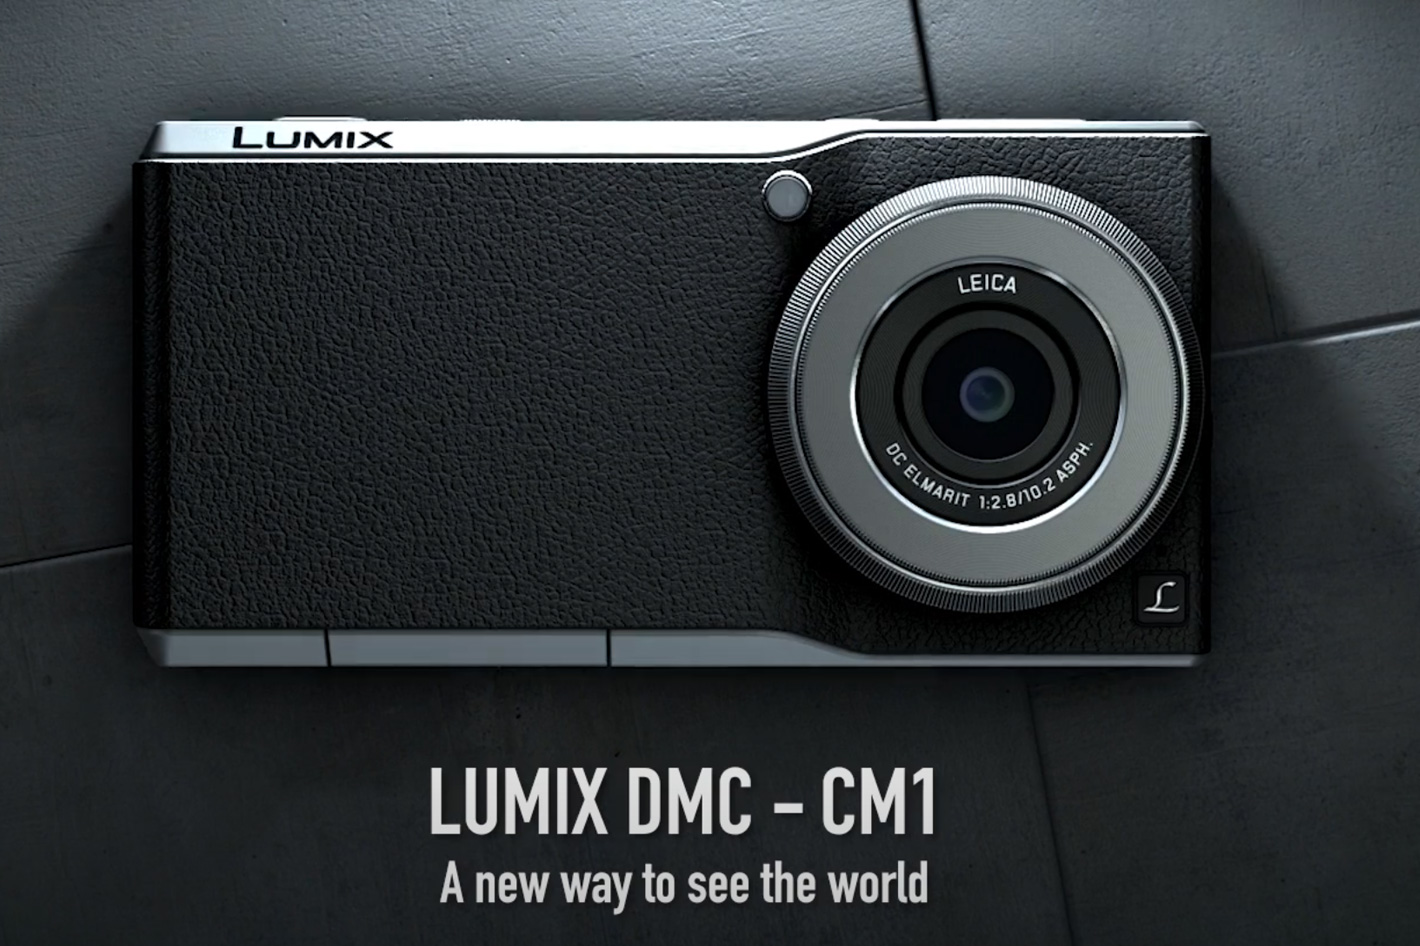 Is Panasonic going to bring back the Lumix CM1 smartphone?